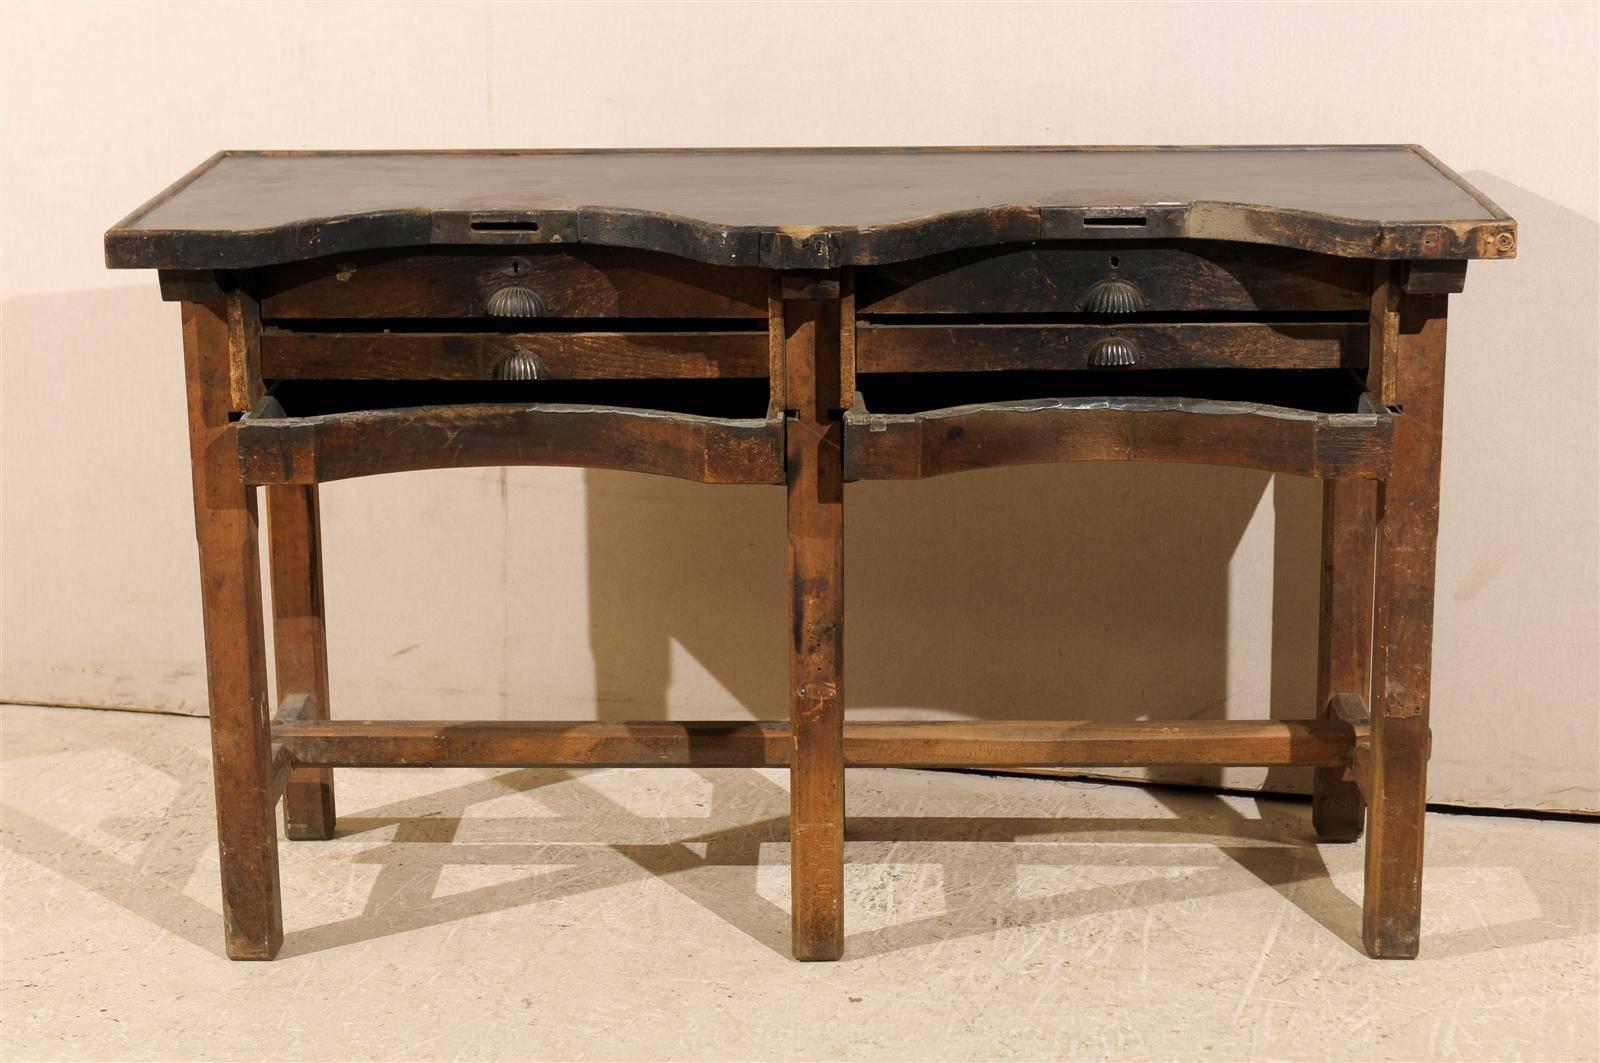 A Dutch wooden jeweler's work table. This jeweler's table is made of several drawers with flat fronts for the upper ones and concave ones in the lower section, echoing the top of the table. It is raised on straight legs joined by a cross and side